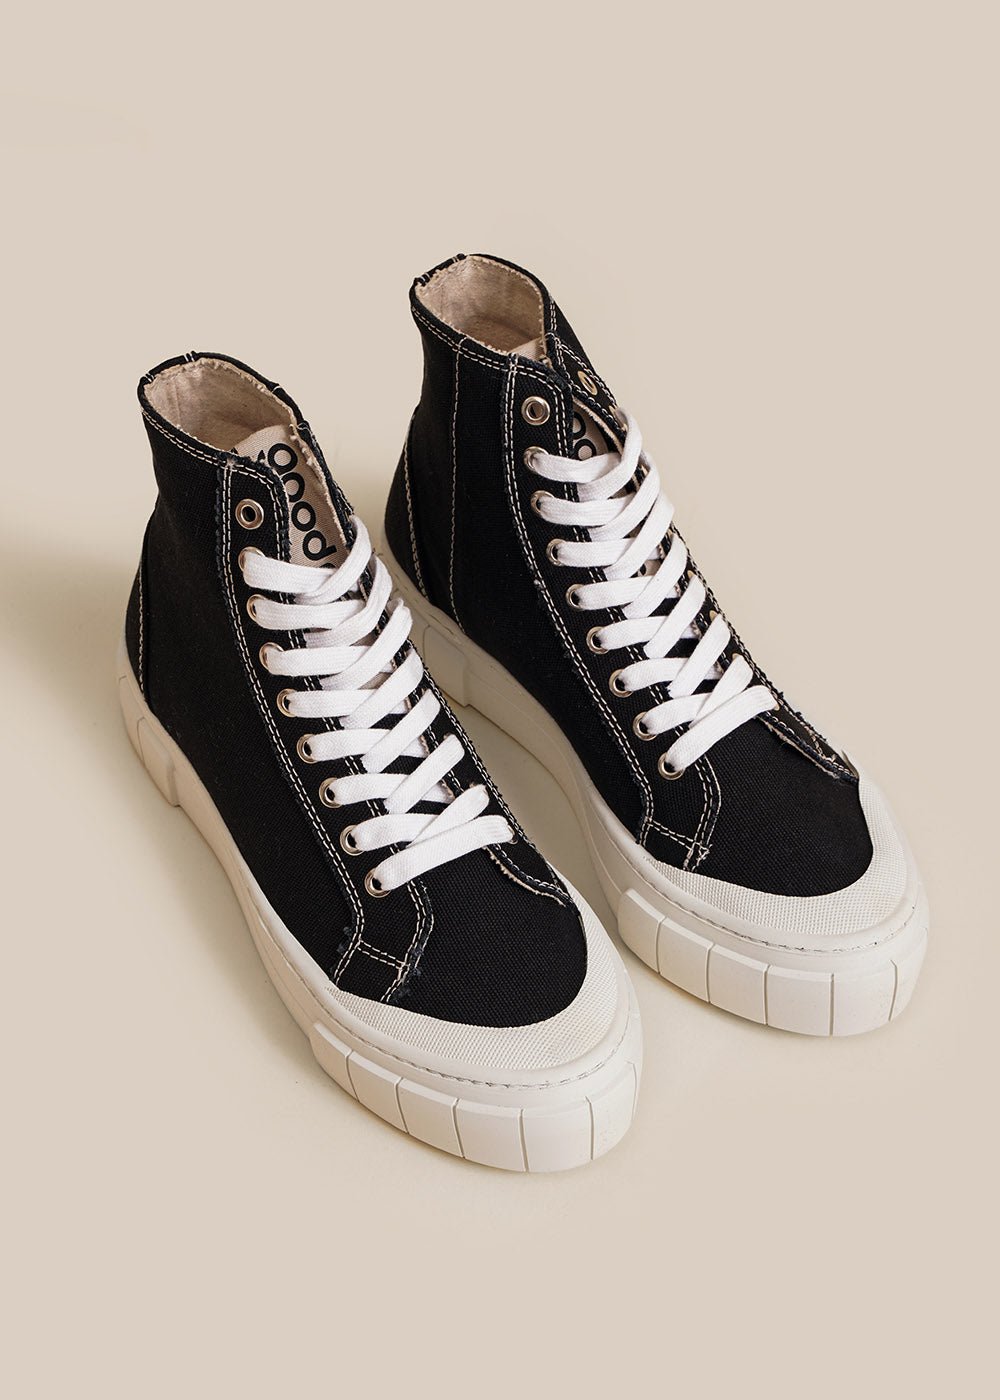 GOOD NEWS Black Juice Sneakers - New Classics Studios Sustainable Ethical Fashion Canada